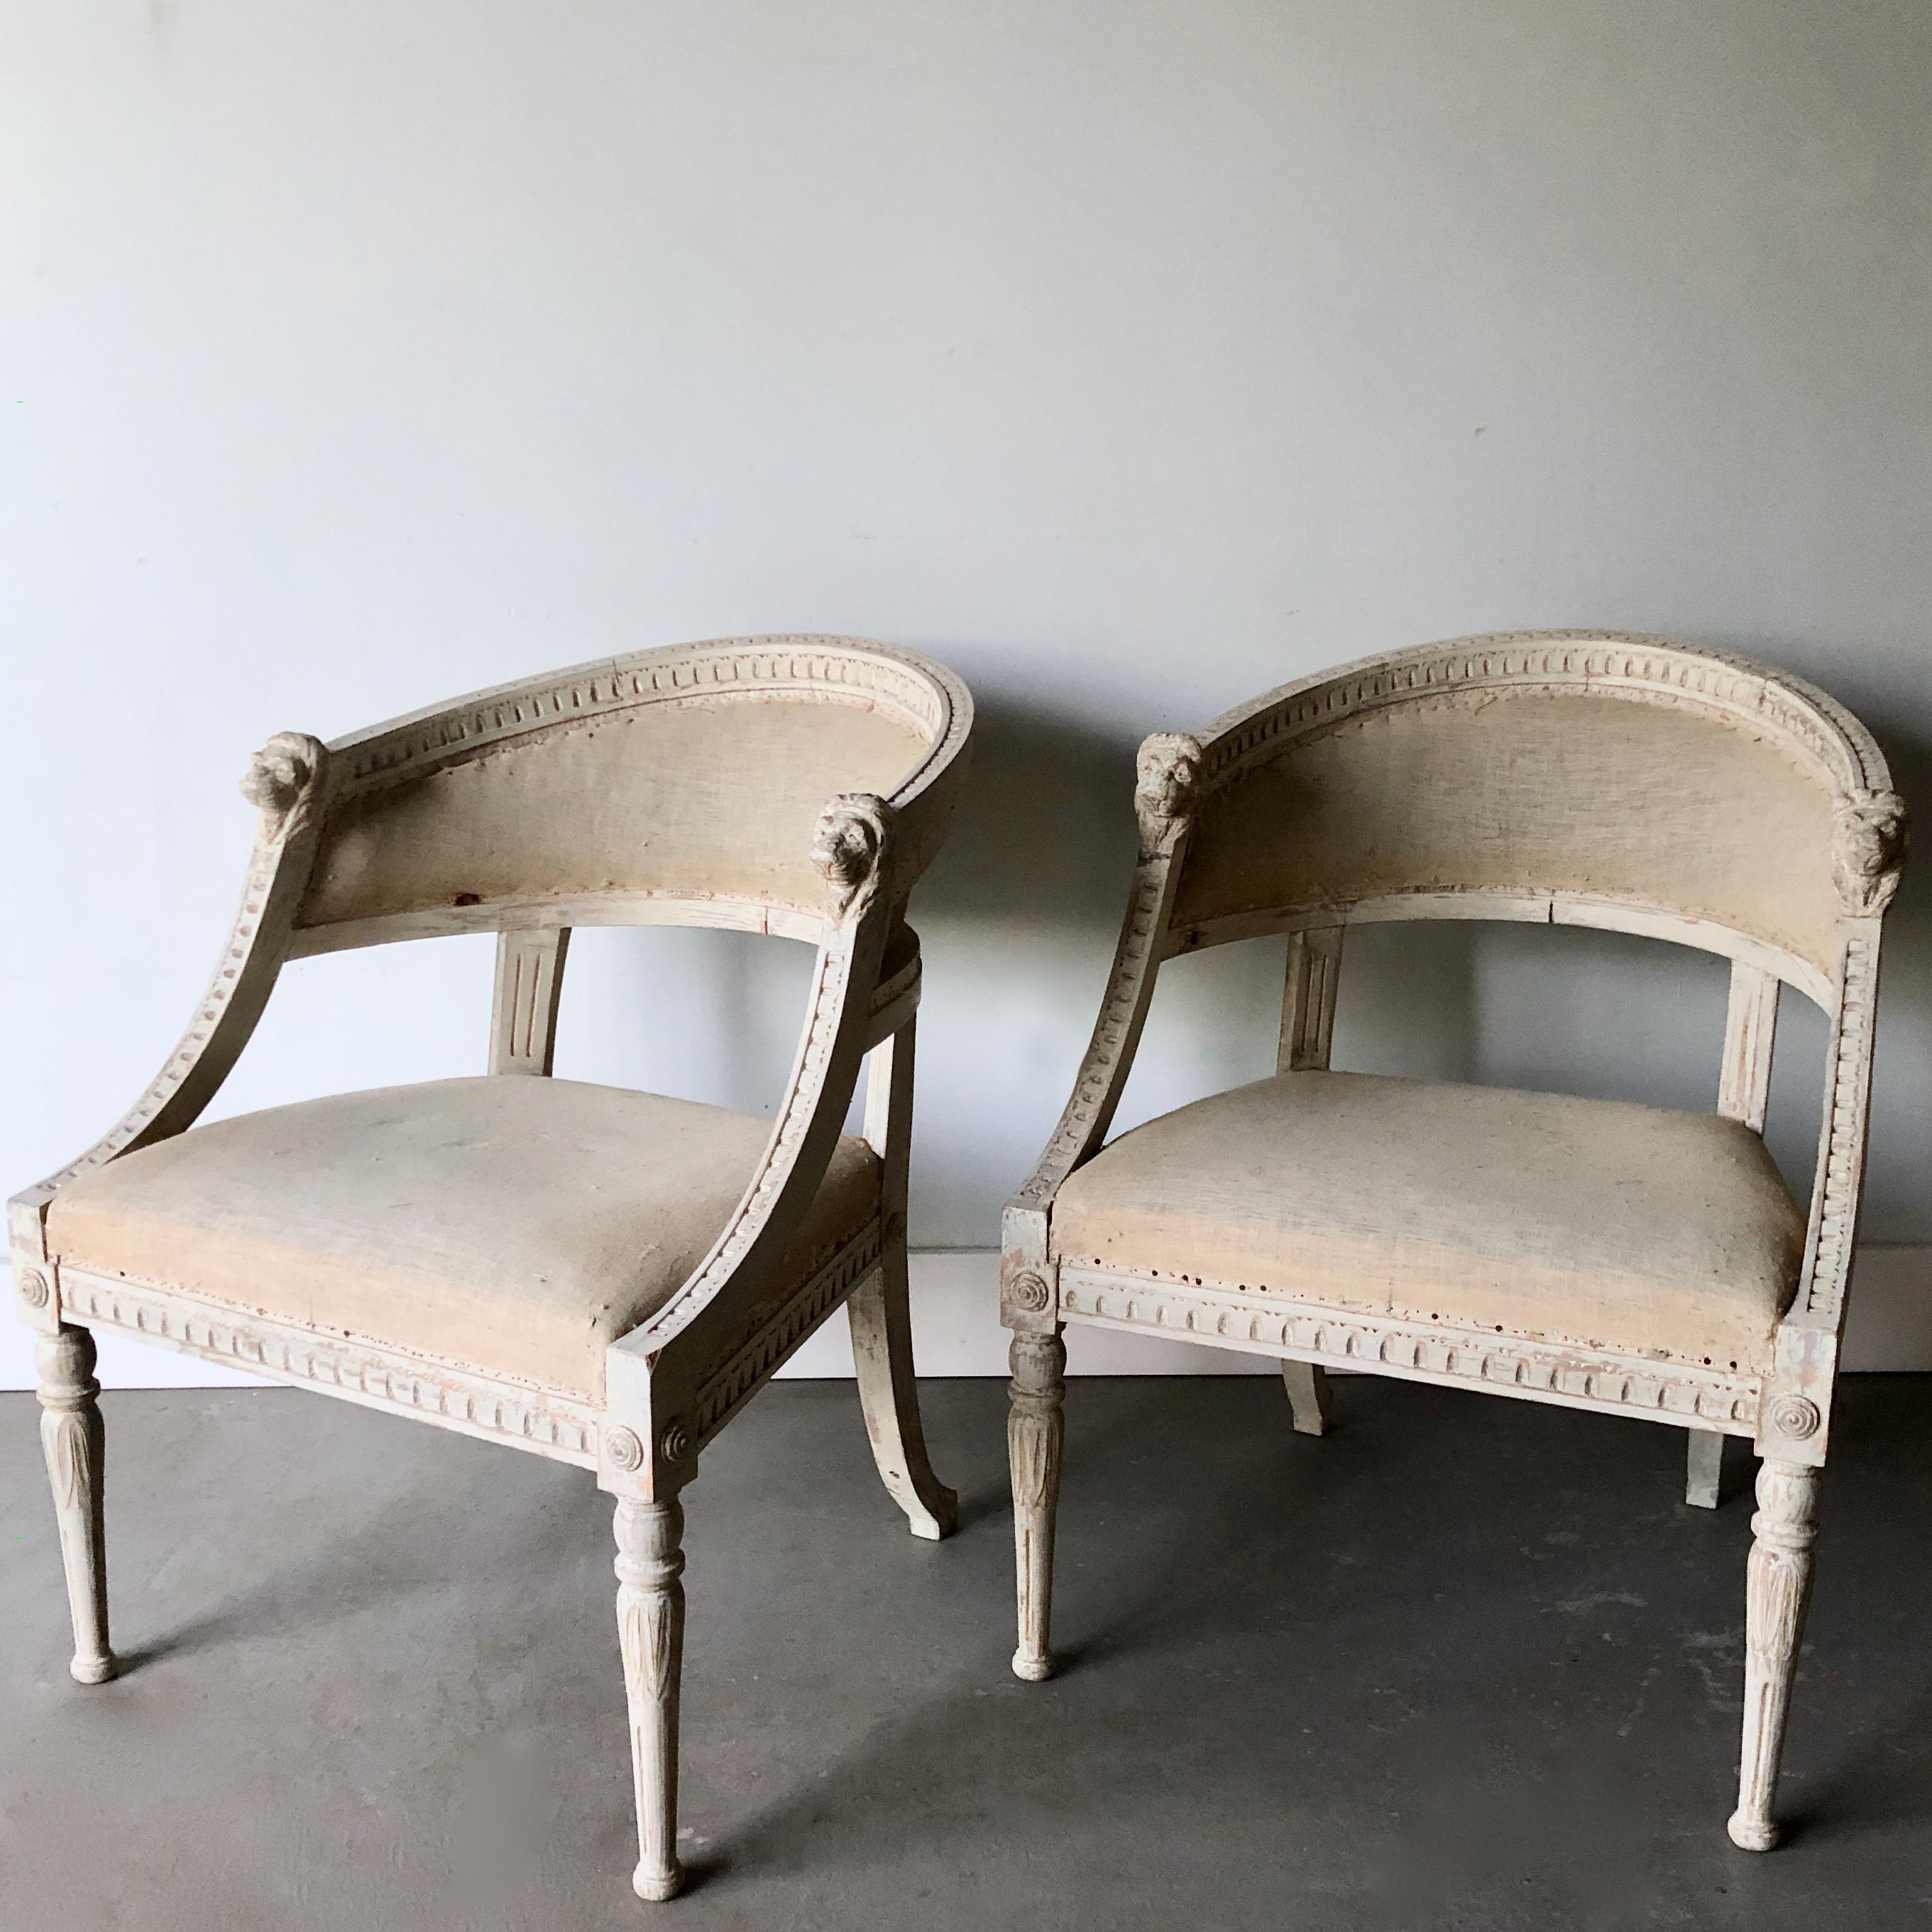 Pair of 19th century barrel back chairs, Sweden circa 1890, with rounded form, detailed lions' head carvings on hand rest and slender tapered legs original worn cream/ white paint finish and padding, ready to your own choice of fabric. More than